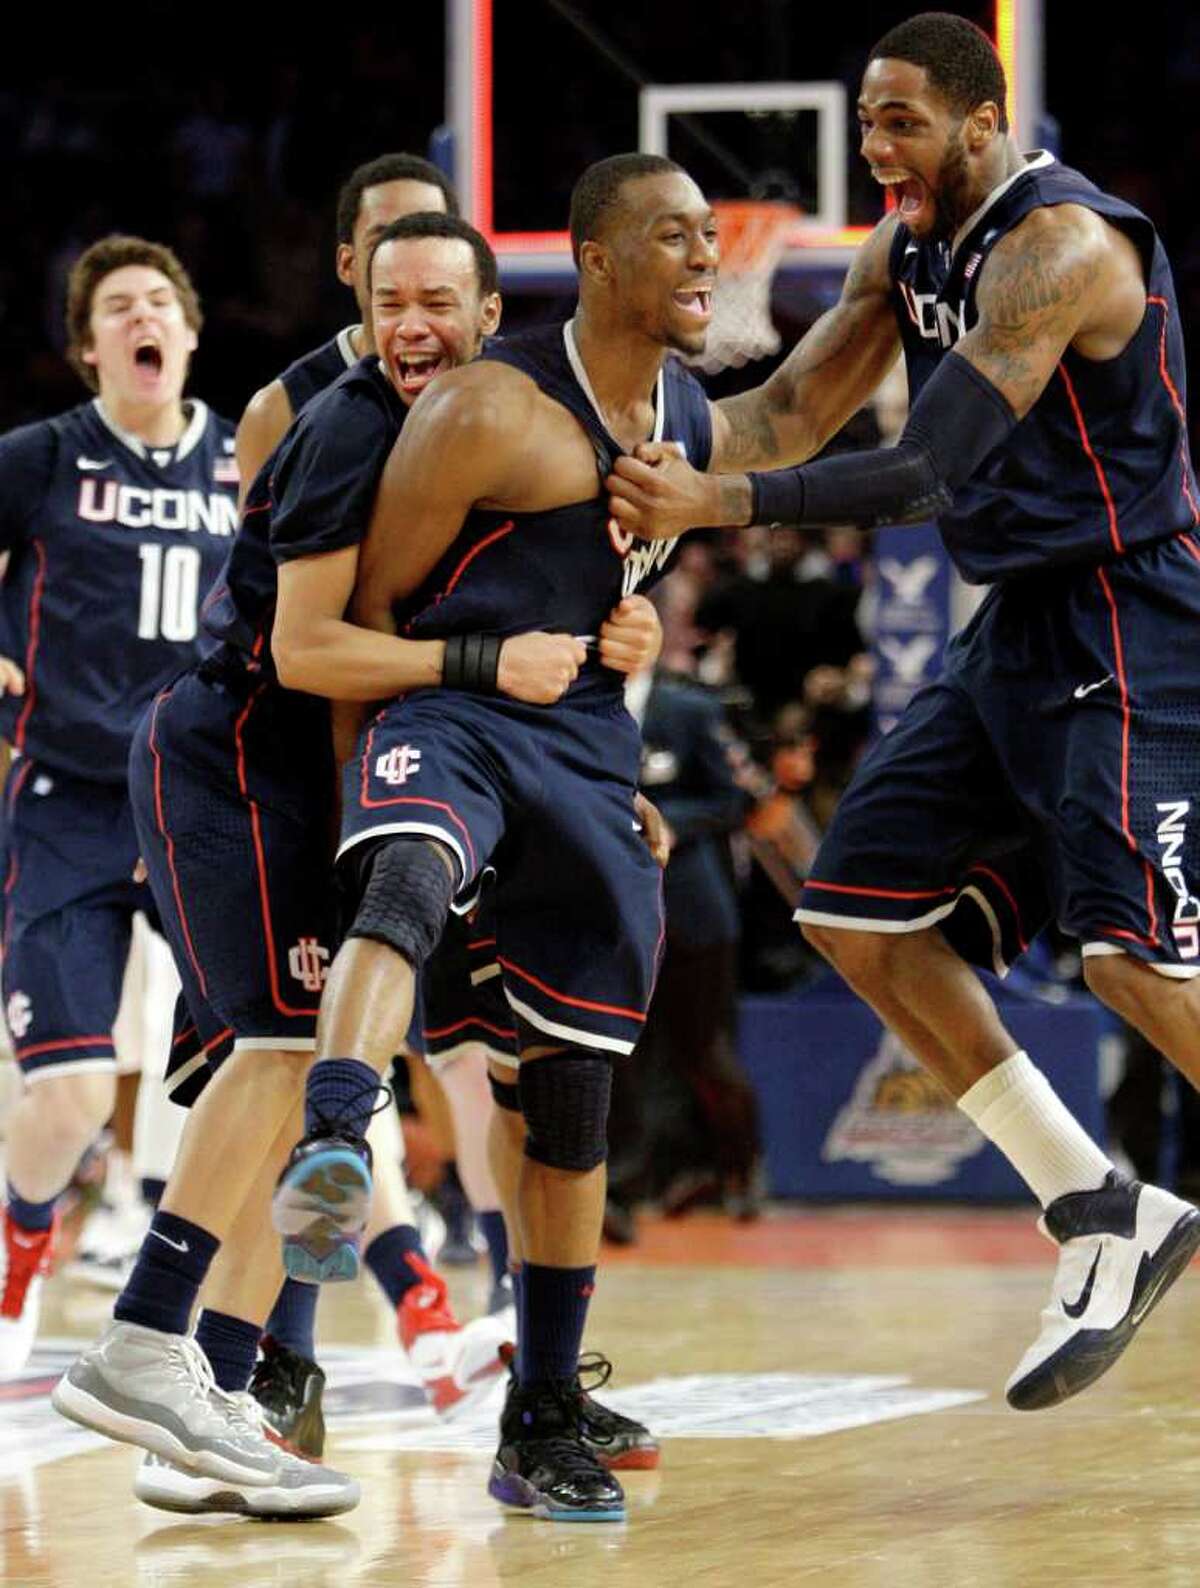 Connecticut's Kemba Walker, center, celebrates scoring the winning goal in the final seconds of the second half of an NCAA college basketball game against Pittsburgh at the Big East Championship, Thursday, March 10, 2011 at Madison Square Garden in New York. Connecticut defeated Pittsburgh 76-74. (AP Photo/Mary Altaffer)